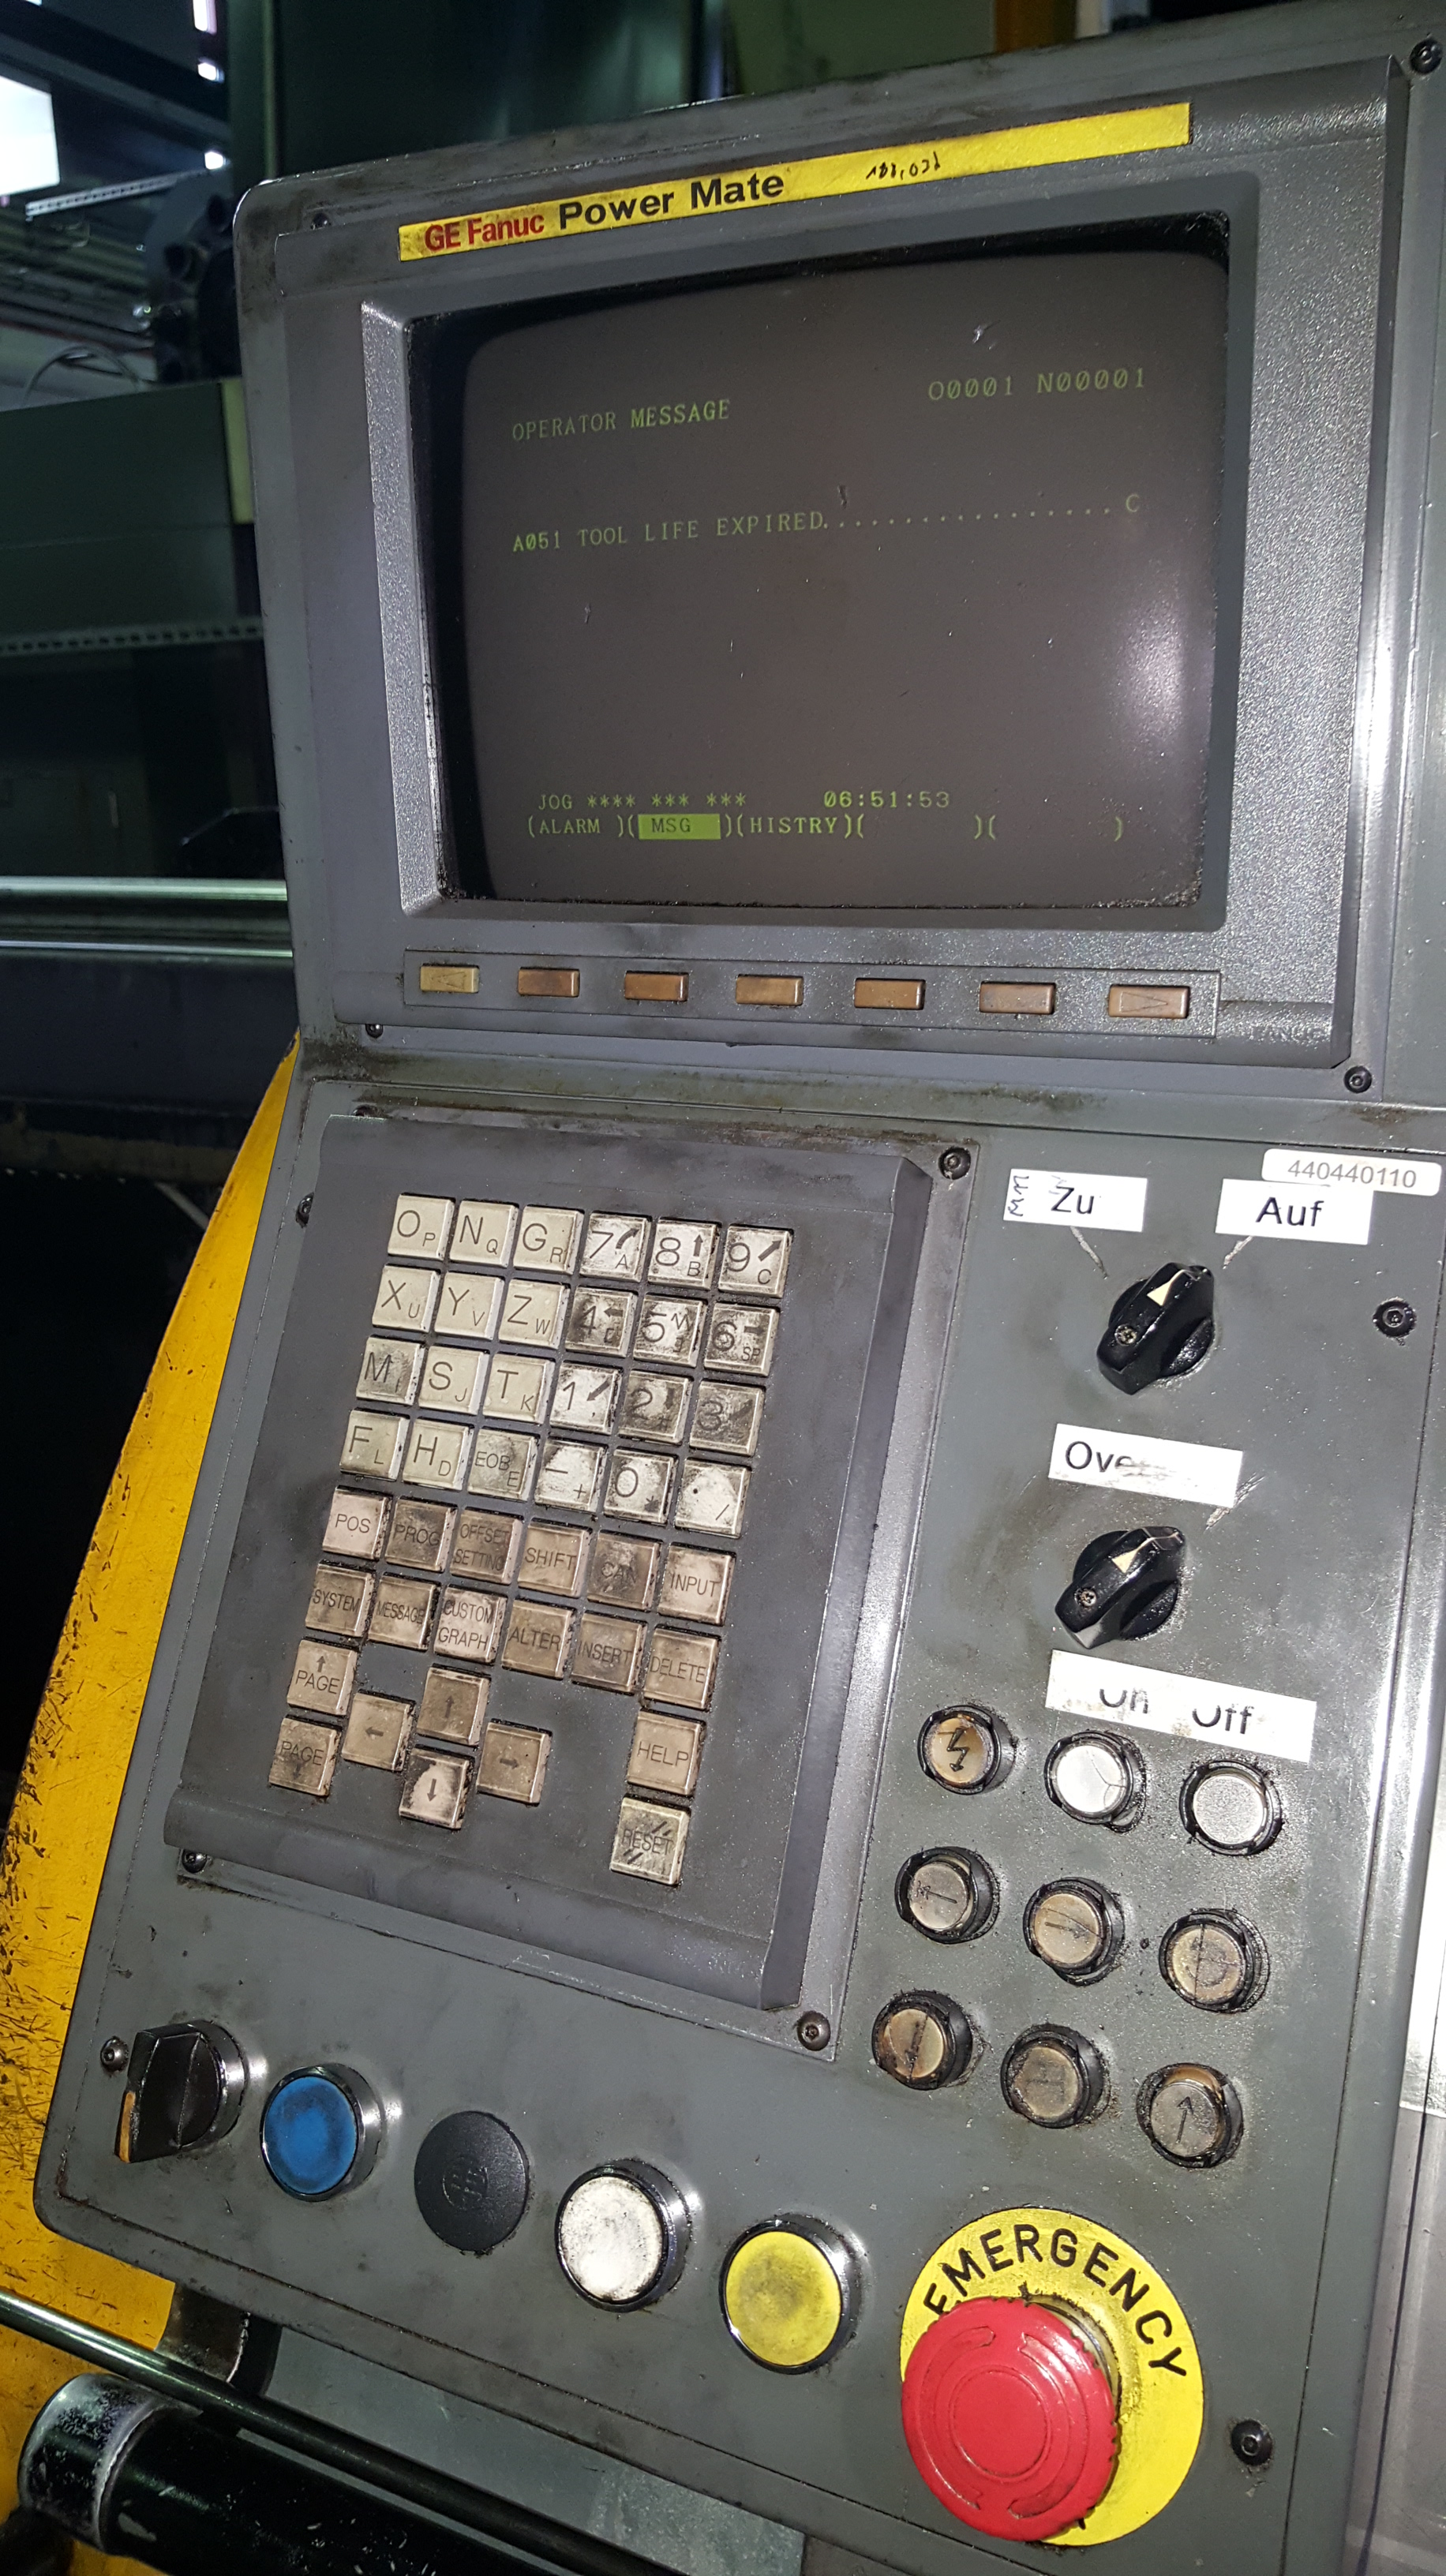 Used FANUC Power MATE Control | Asset-Trade